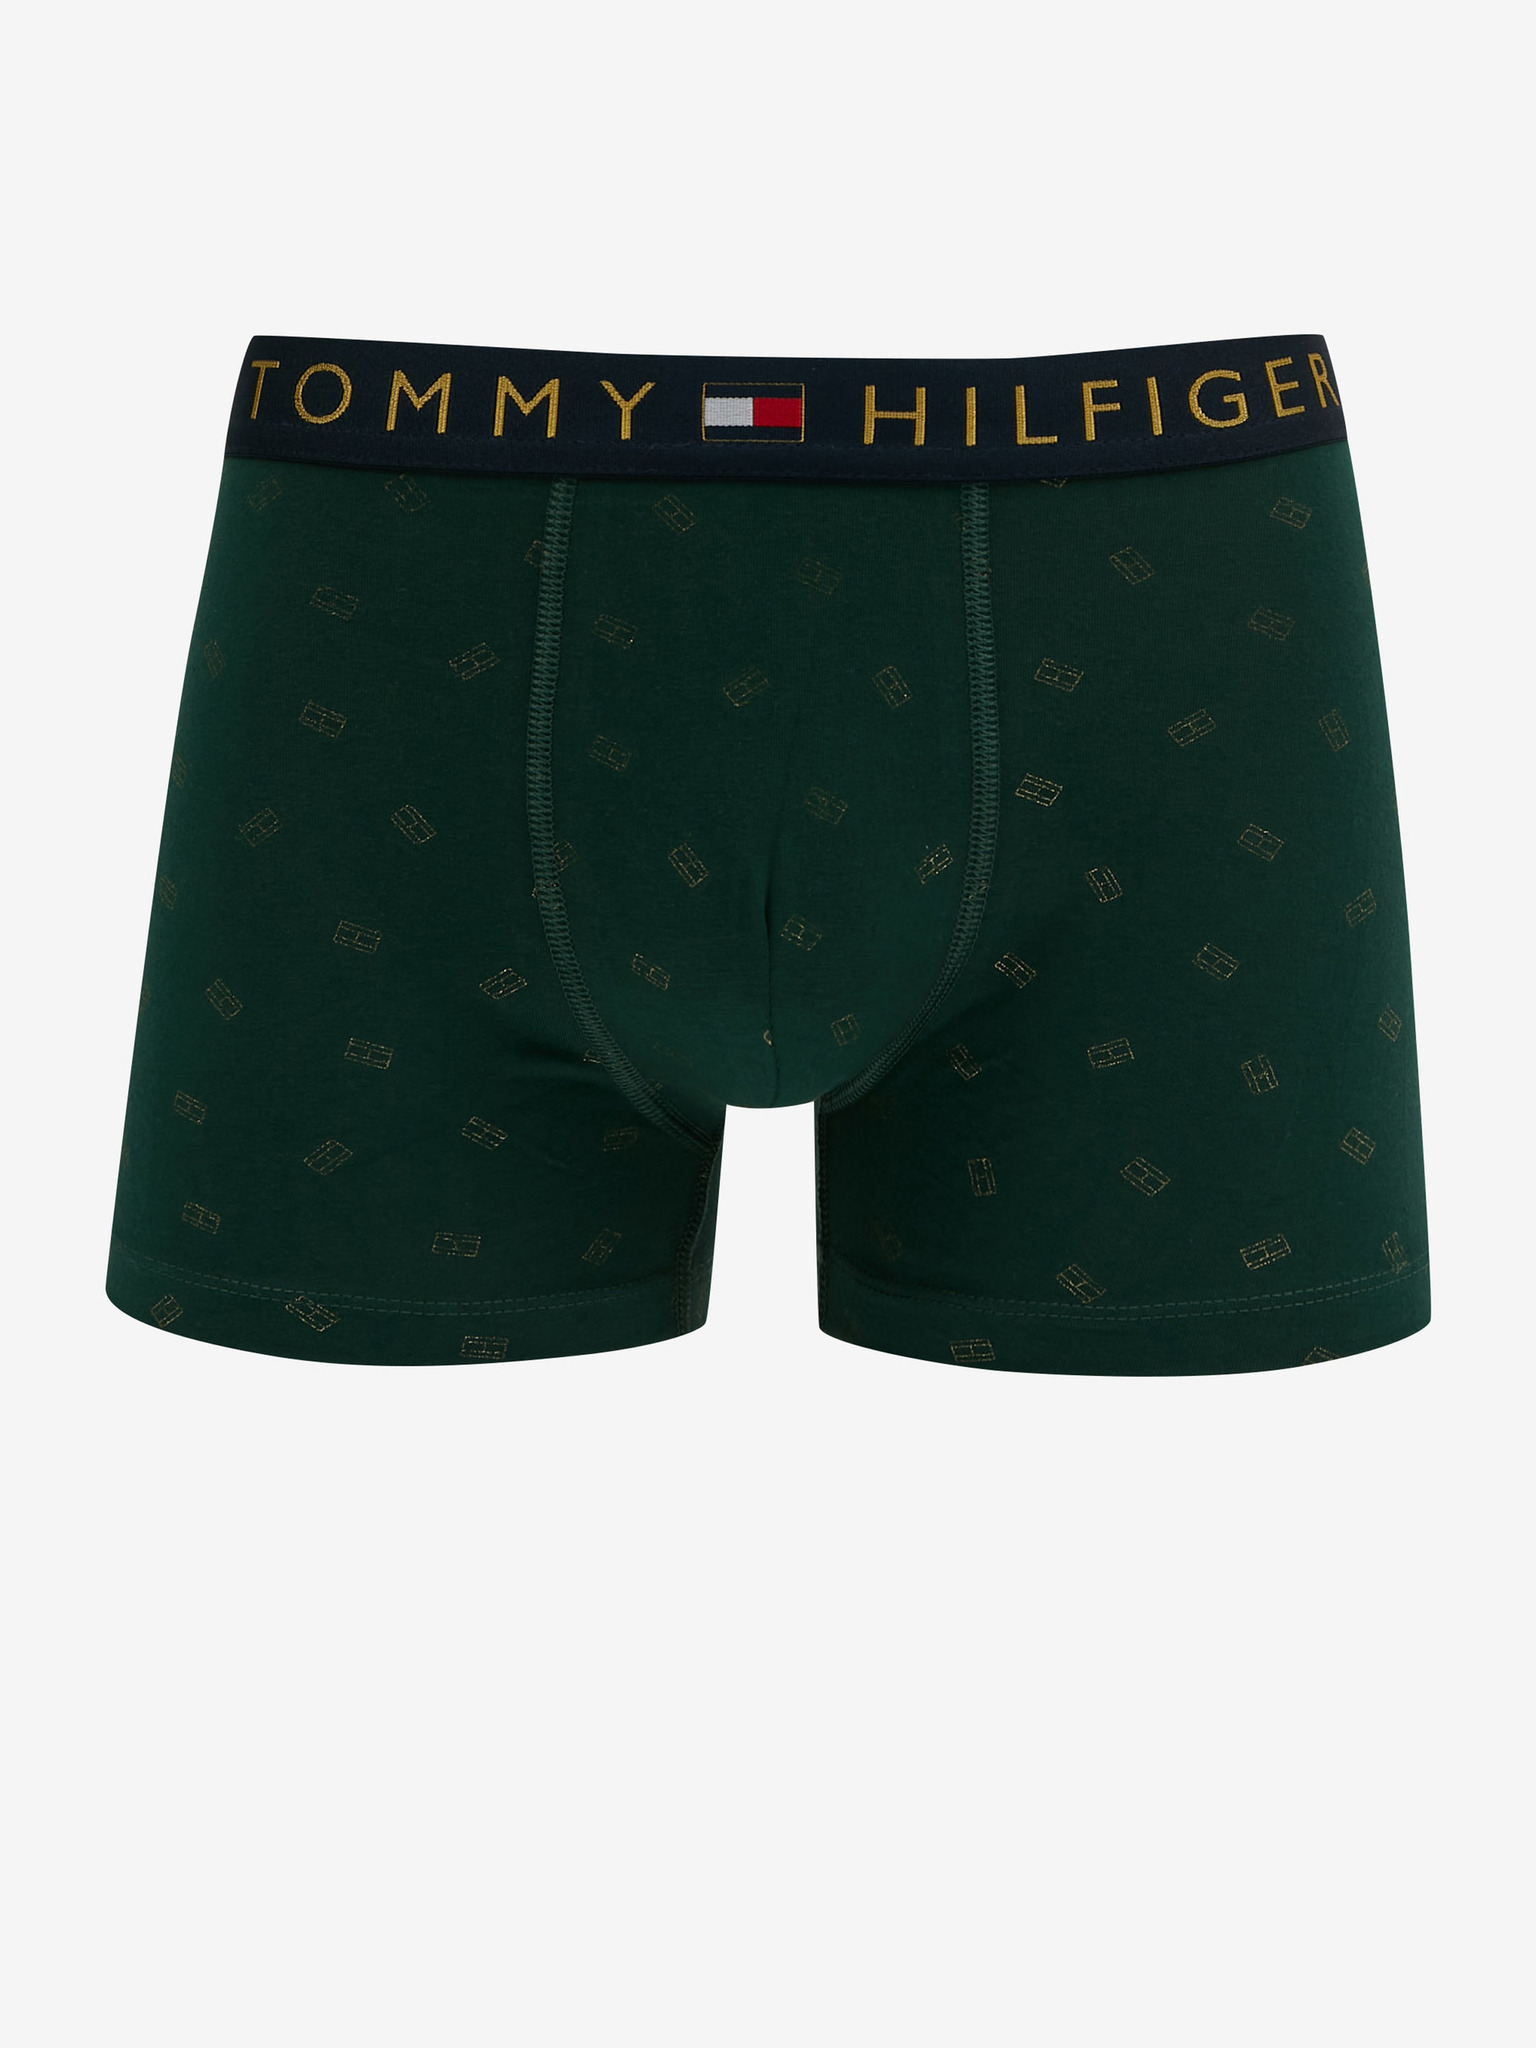 Tommy Jeans - Boxer shorts